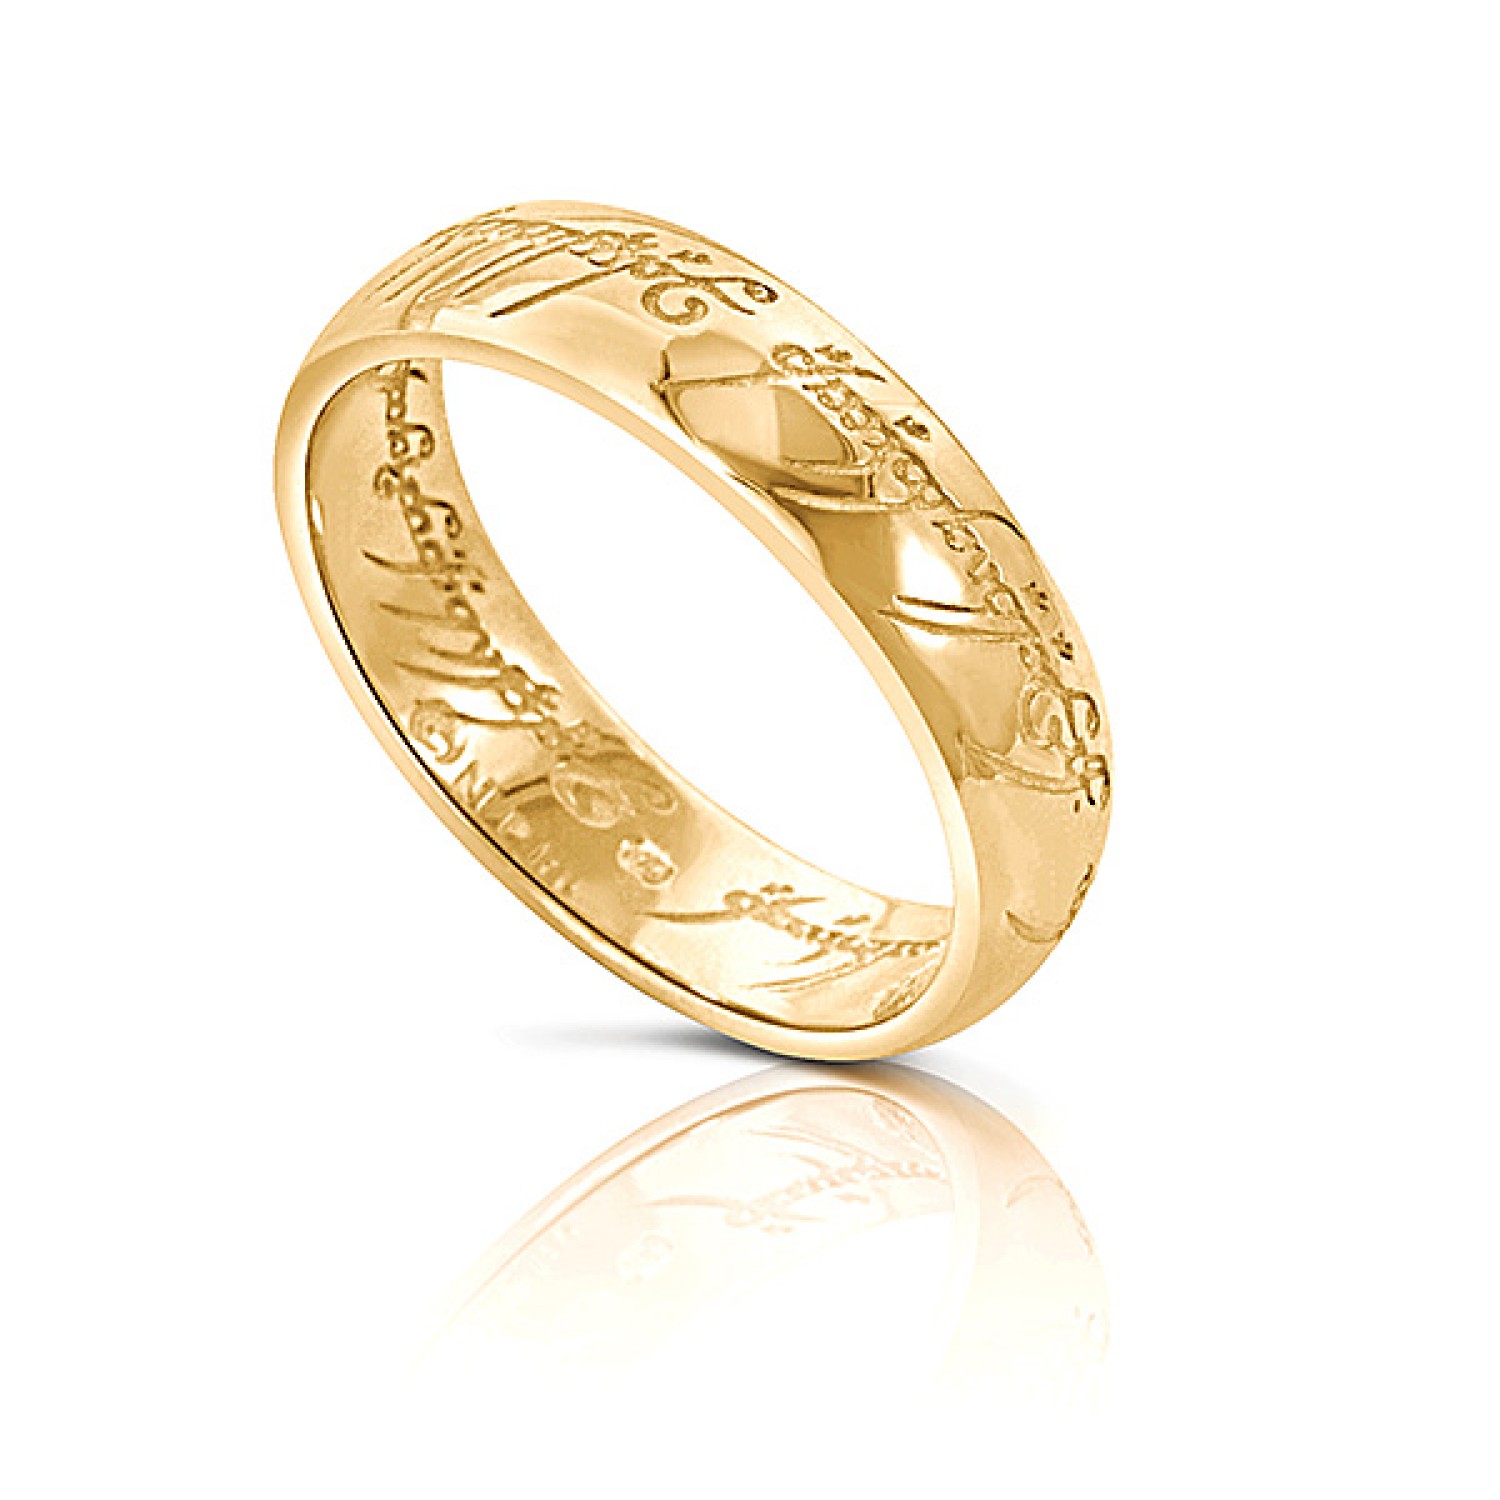 Lord of the Rings 9ct Gold The One Ring of Power. The Official LOTR One Ring carefully crafted by Middle Earths Hobbit Jewellers and engraved with the Elvish Runes.  One ring to rule them all, One ring to find them, One ring to bring them all and in the d